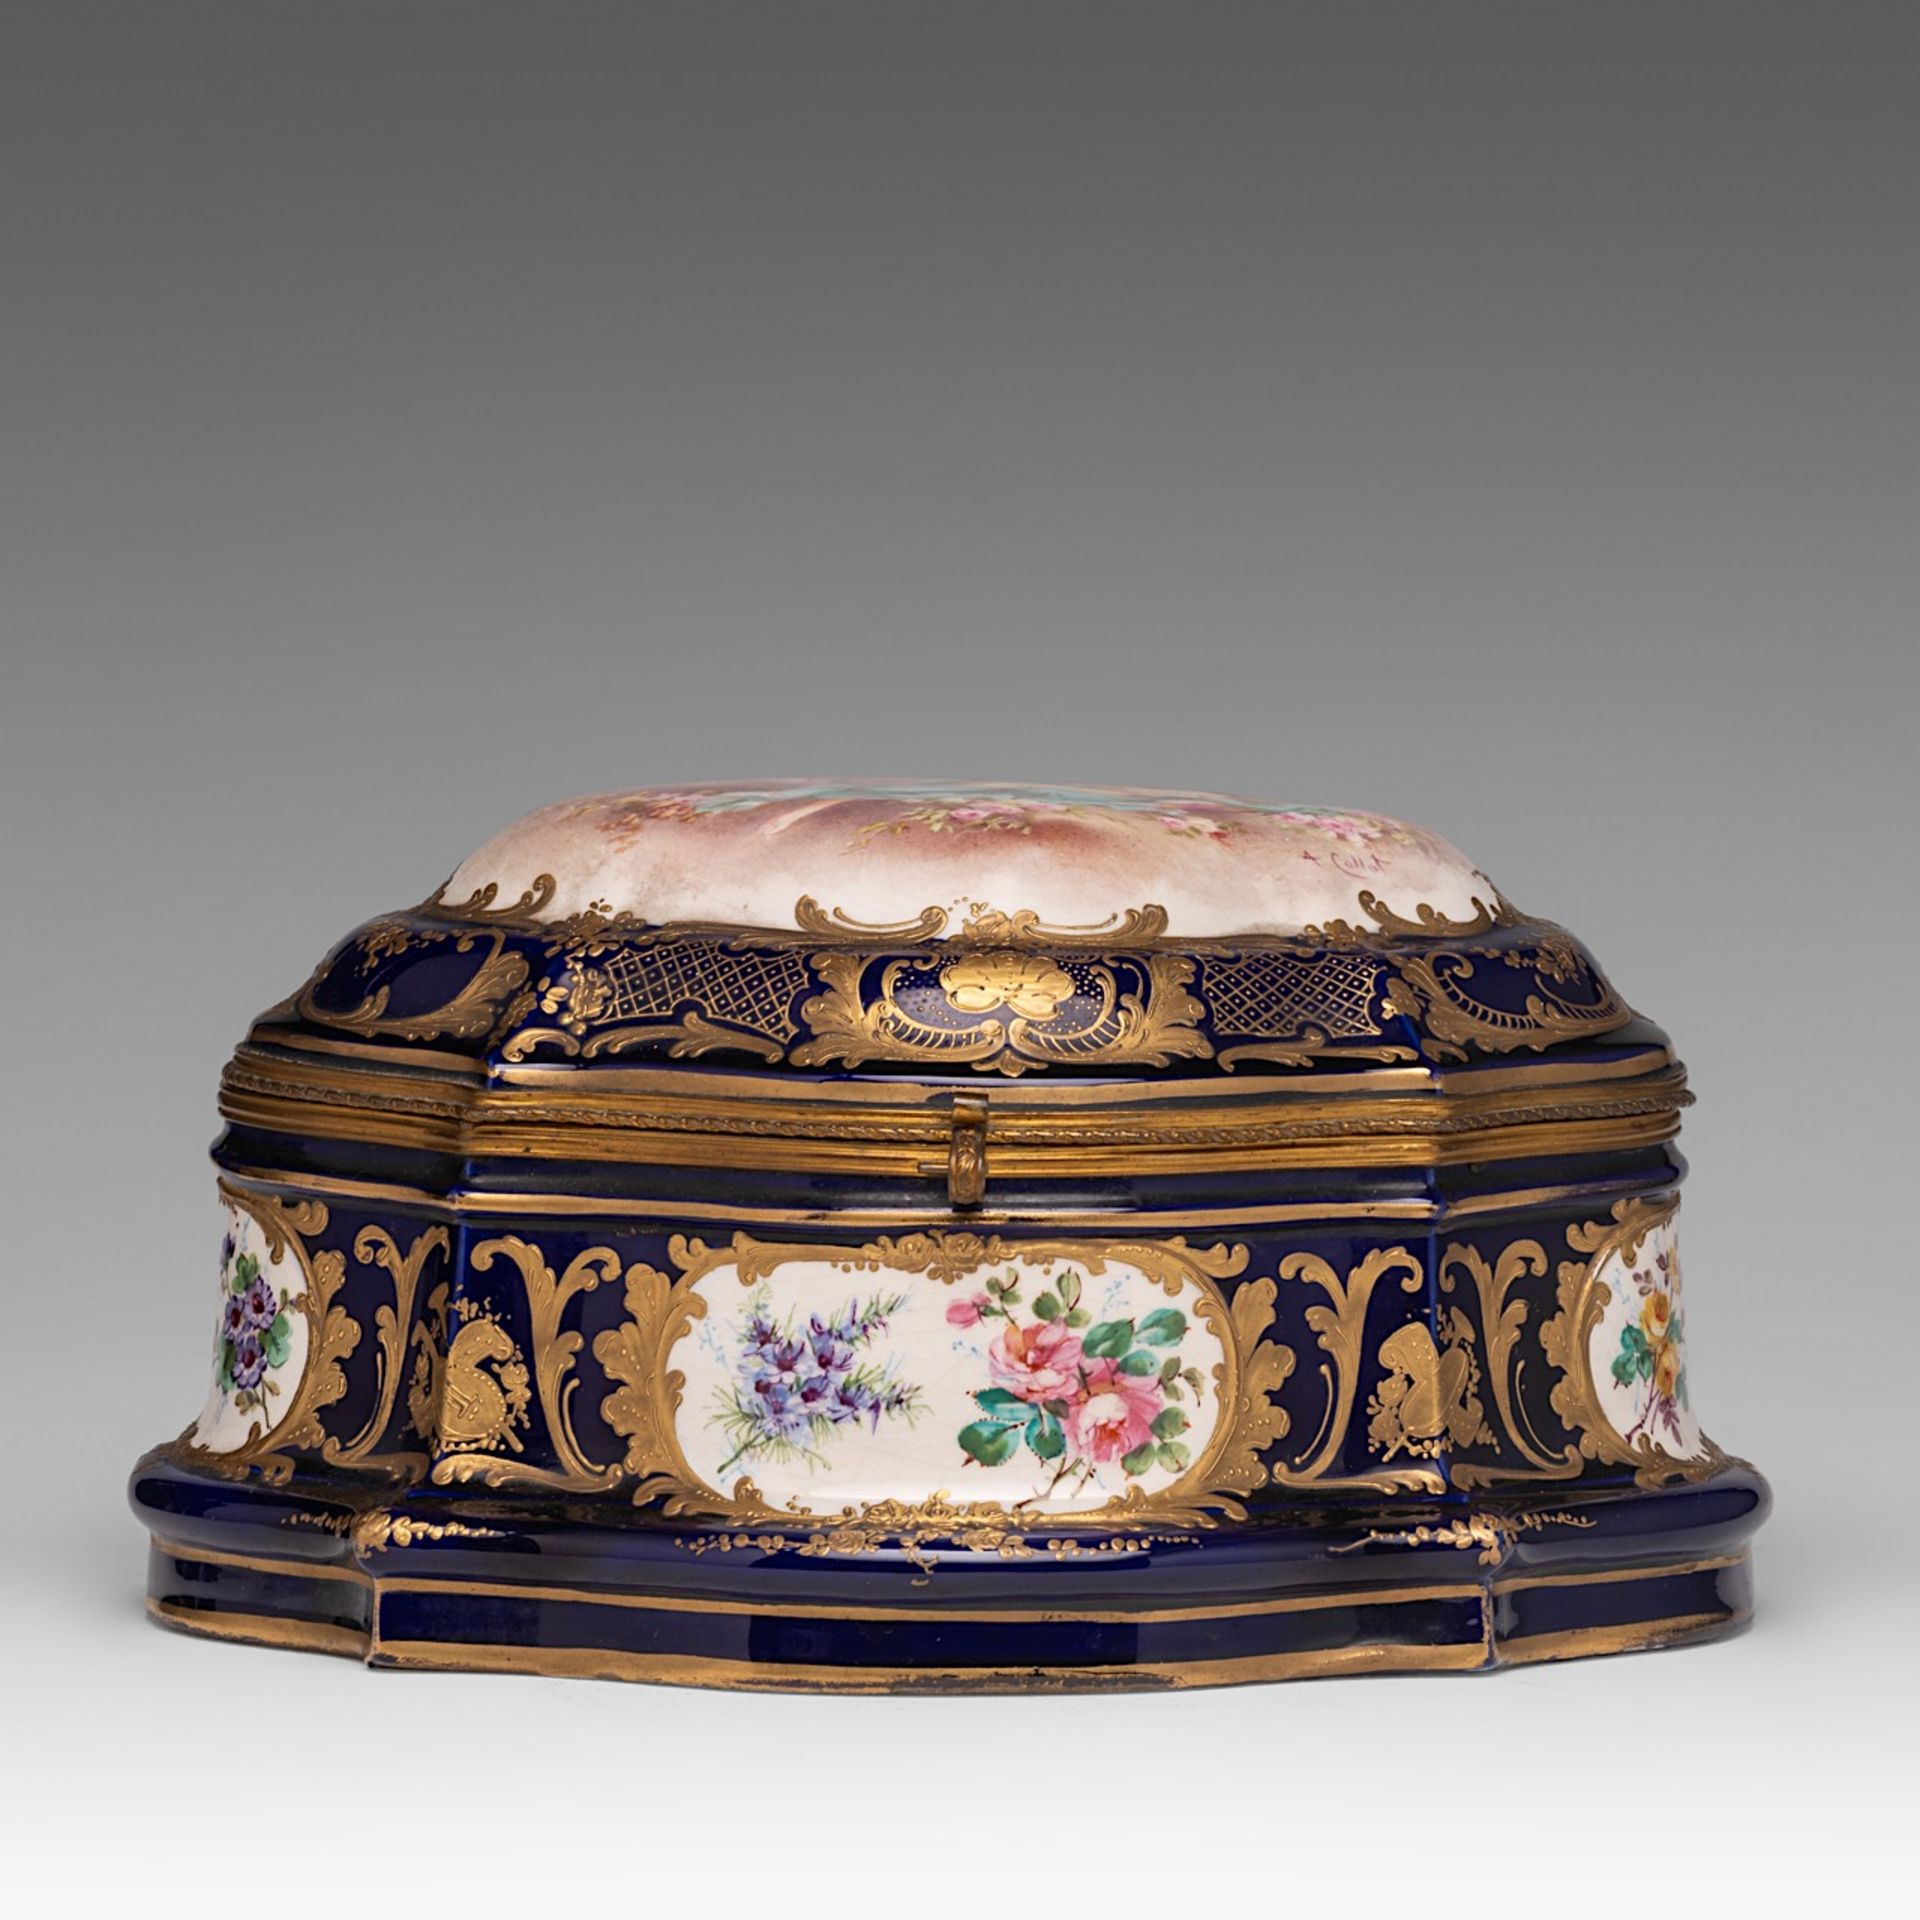 A fine bleu royale ground Sevres box with gilt decoration and hand-painted roundels, signed A. Collo - Image 2 of 12